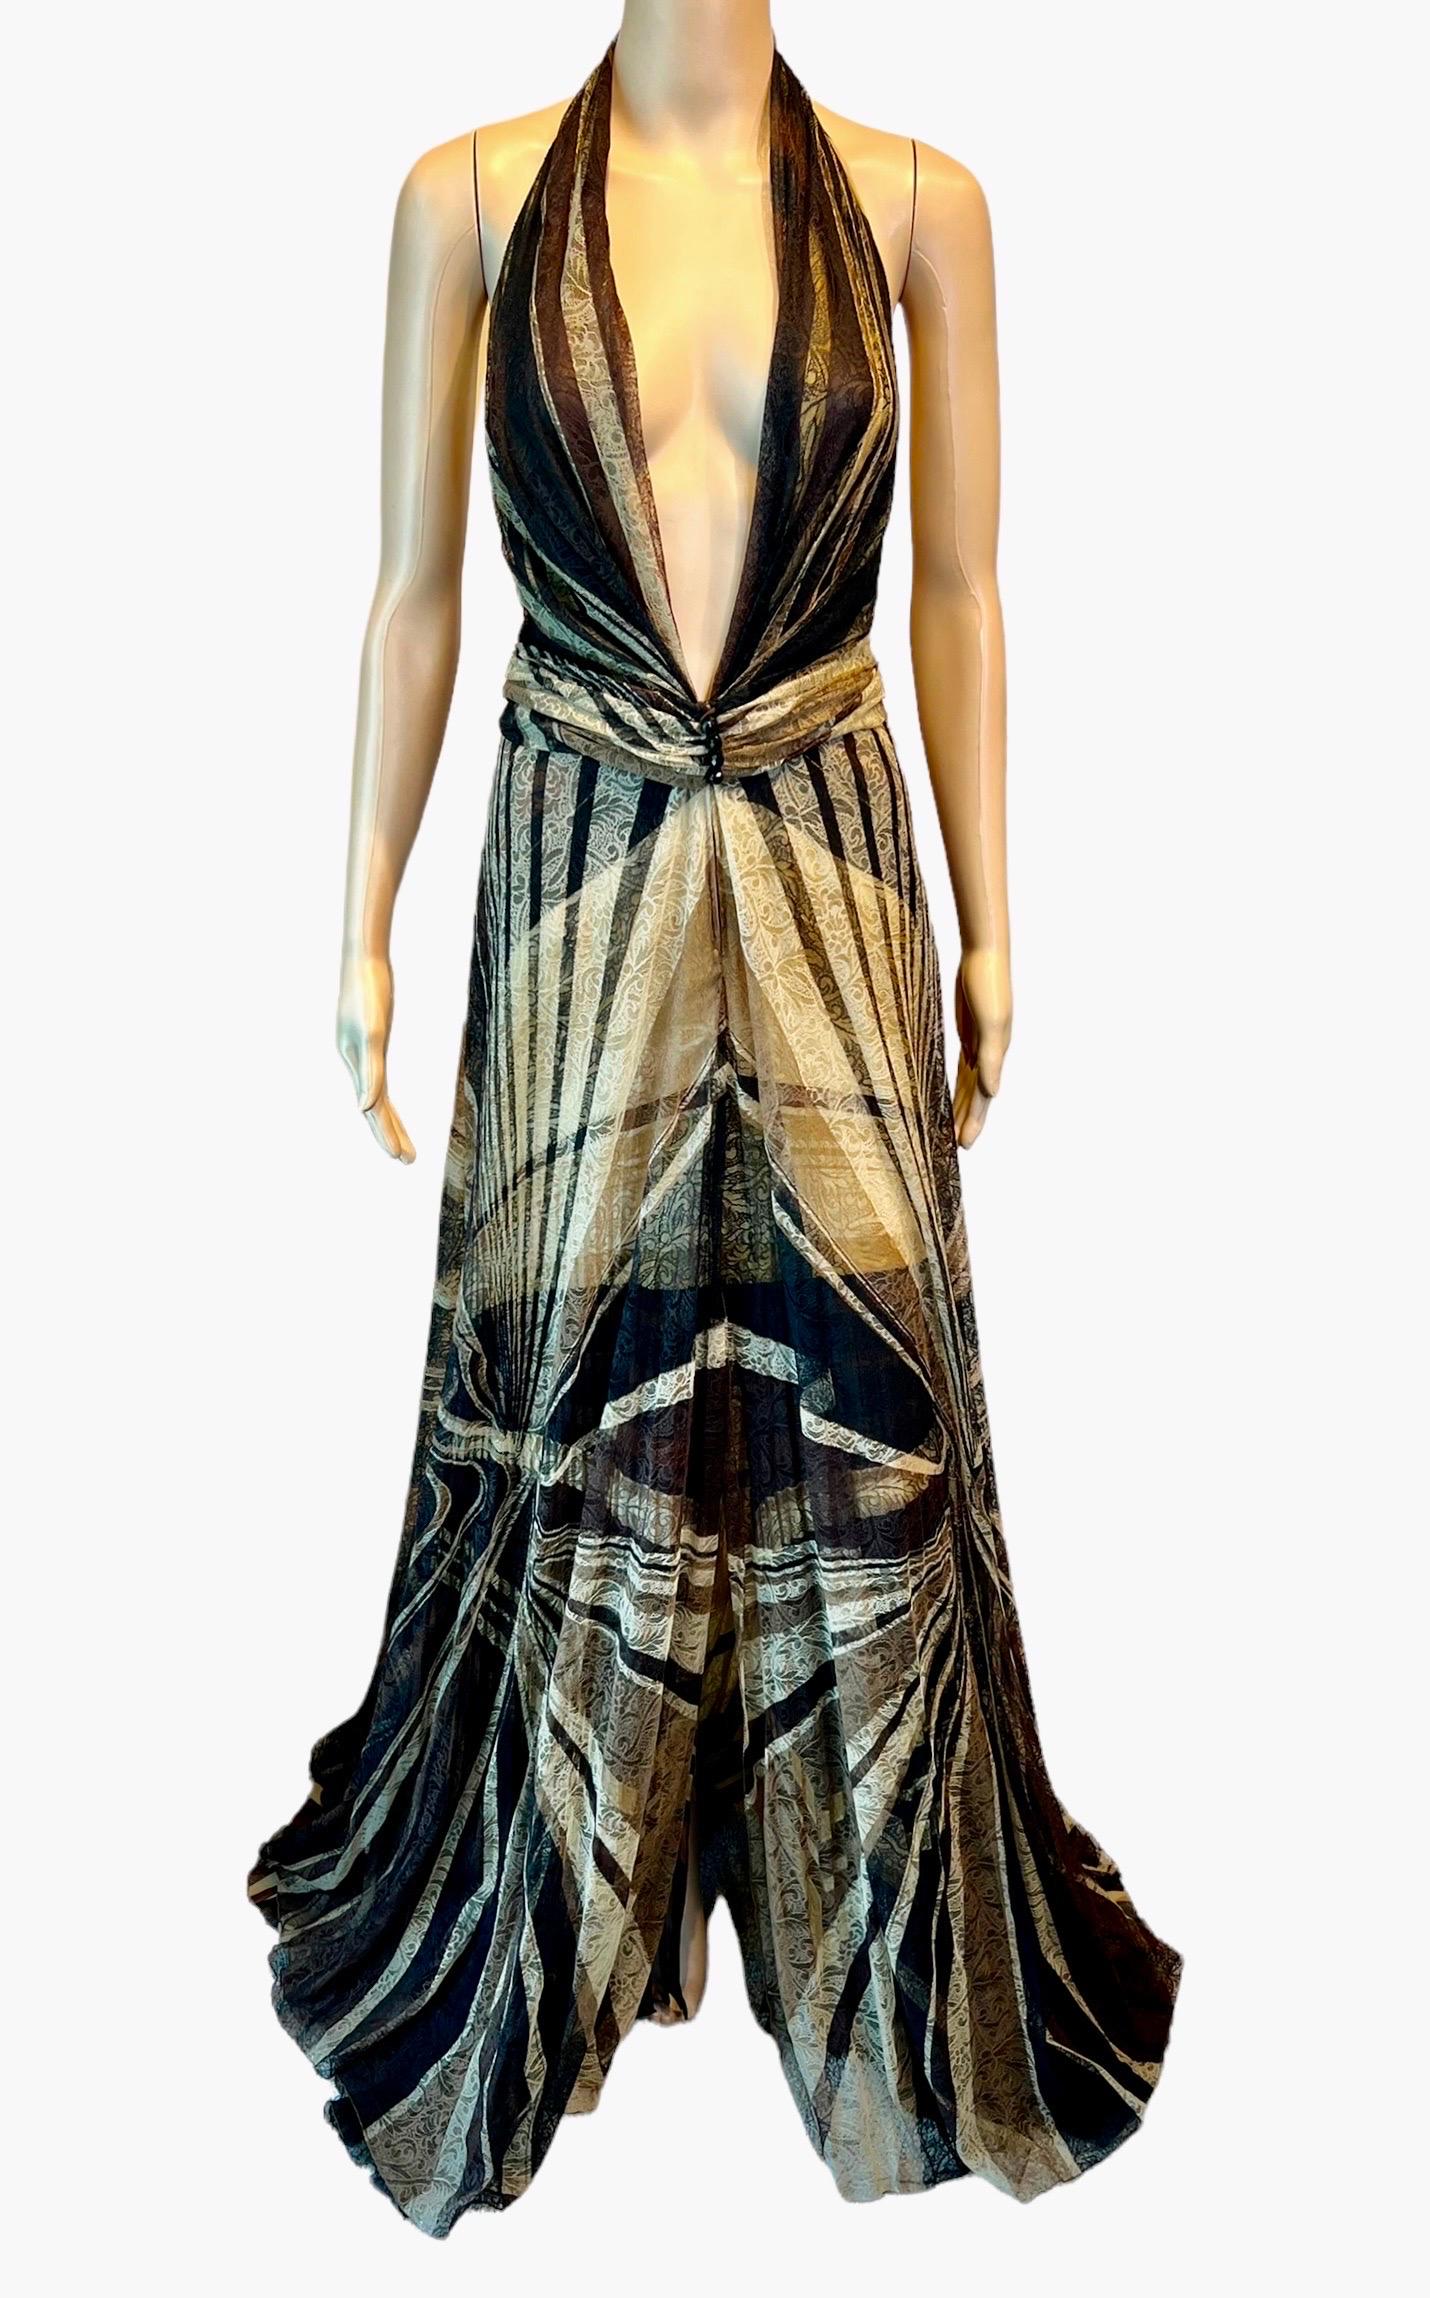 Gianni Versace F/W 2000 Runway Plunging Sheer Lace Silk Backless Evening Dress Gown IT 42

Look 57 from the Fall 2000 Collection. Futured in the Fall 2000 Versace Campaign.
